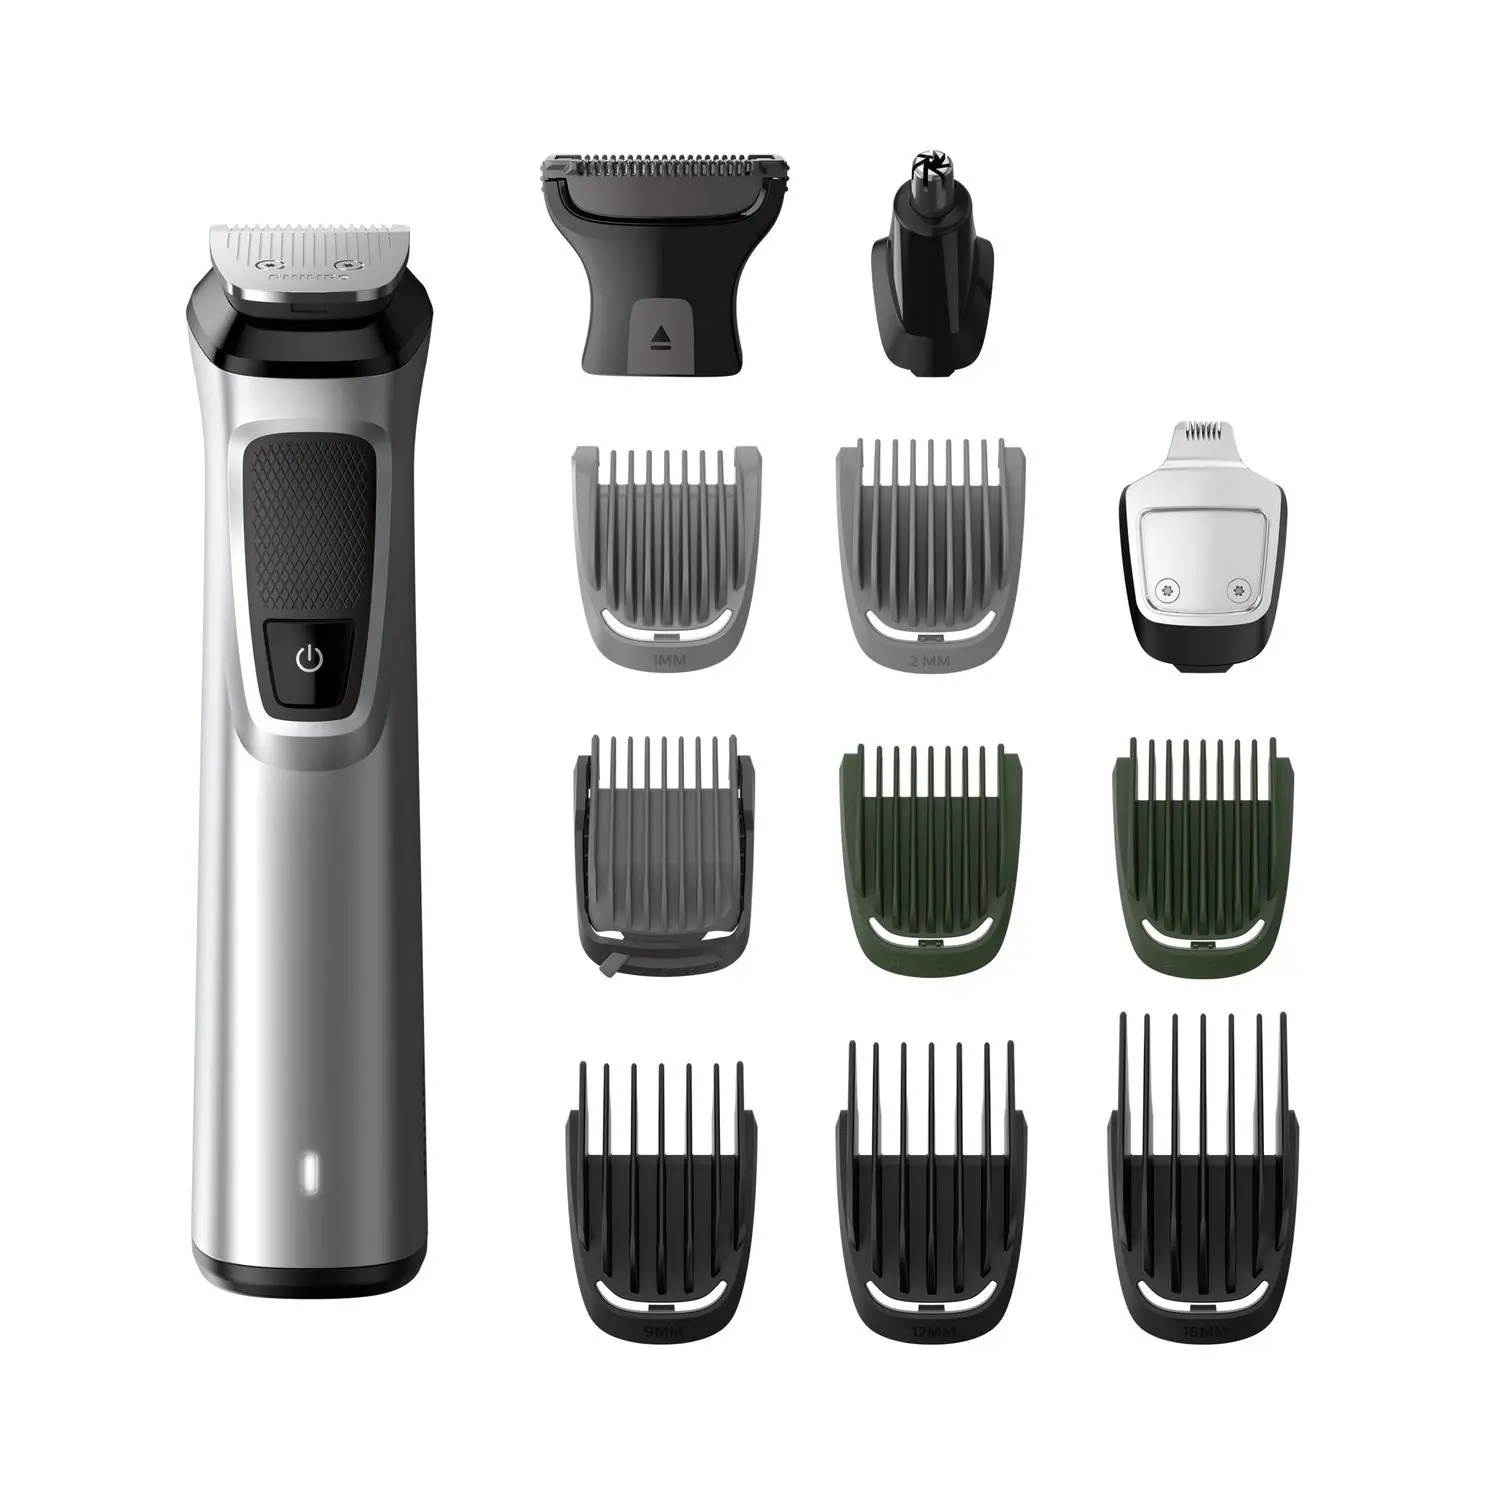 Philips Multi Grooming Kit MG7715/65, 13-in-1, Face, Head and Body - All-in-one Trimmer. Power adapt technology for precise trimming, 120 Mins Run Time with Quick Charge